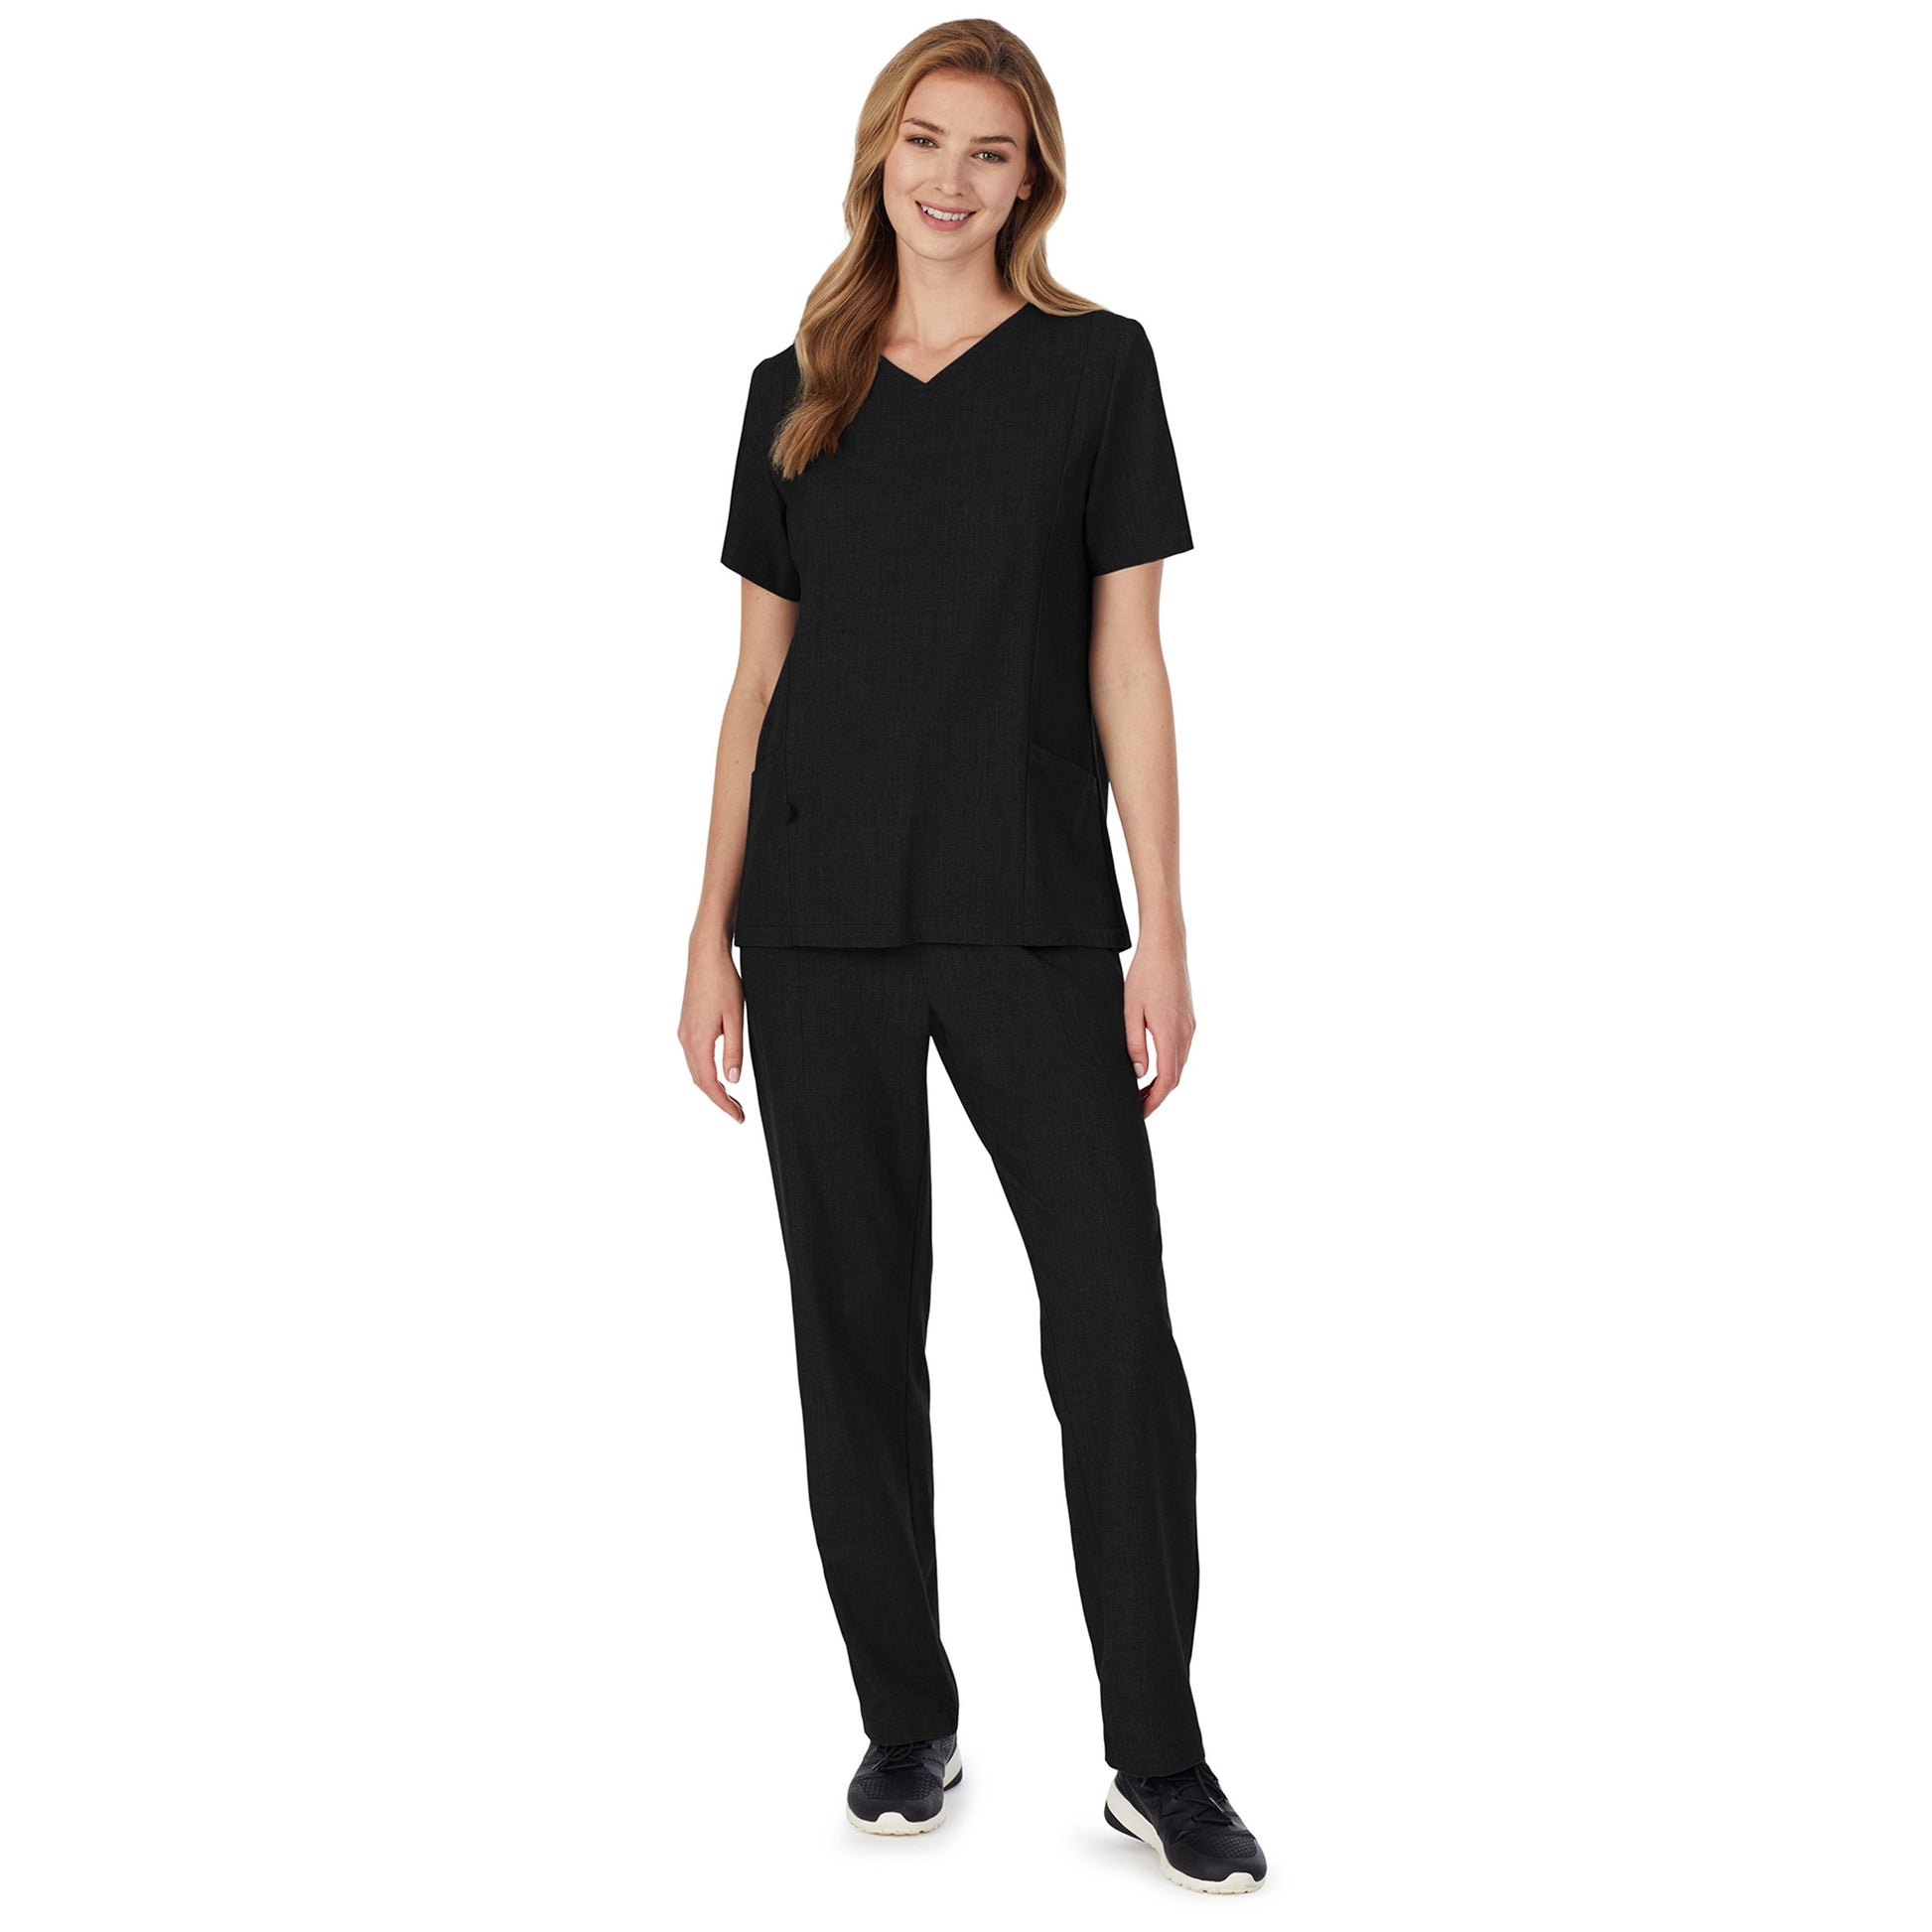 Black;Model is wearing size S. She is 5’9”, Bust 32”, Waist 23", Hips 34.5”.@A lady wearing black scrub v-neck top with side pockets.